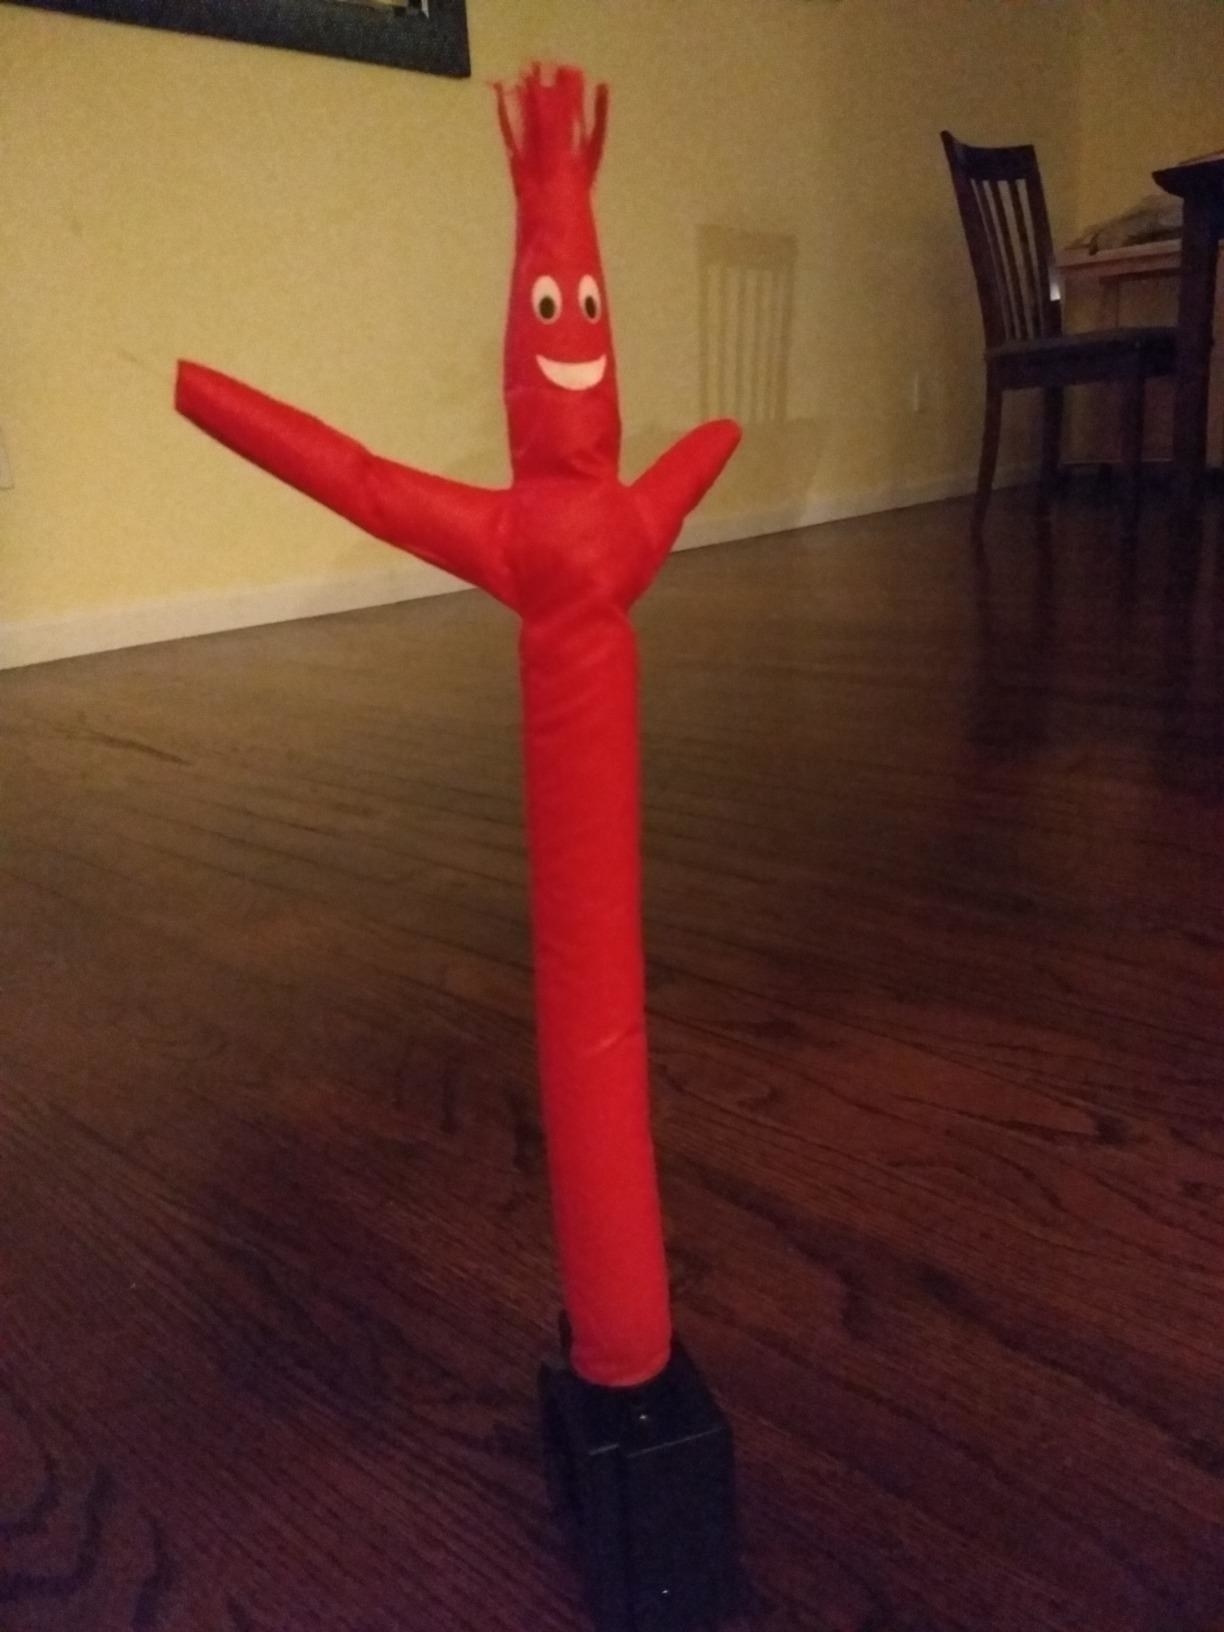 the inflatable tube guy displayed upright on the floor of someone&#x27;s home